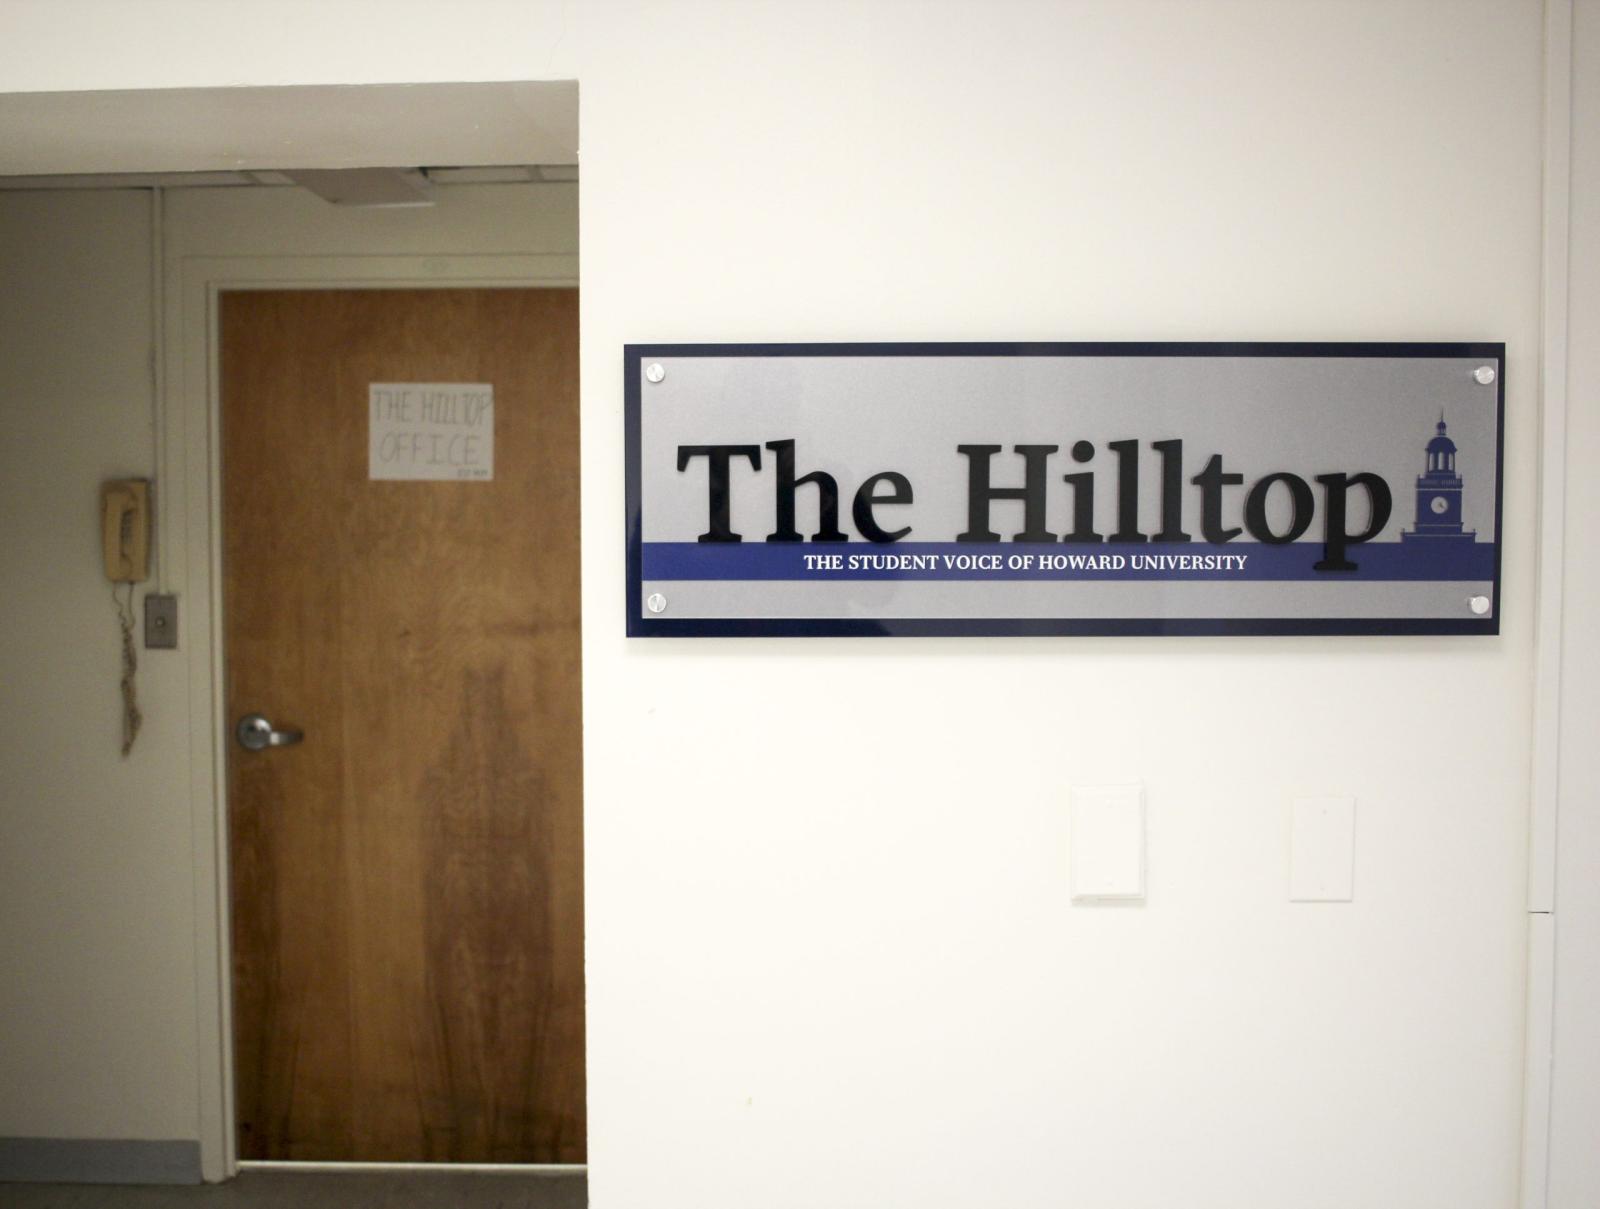 The entrance to The Hilltop's offices.